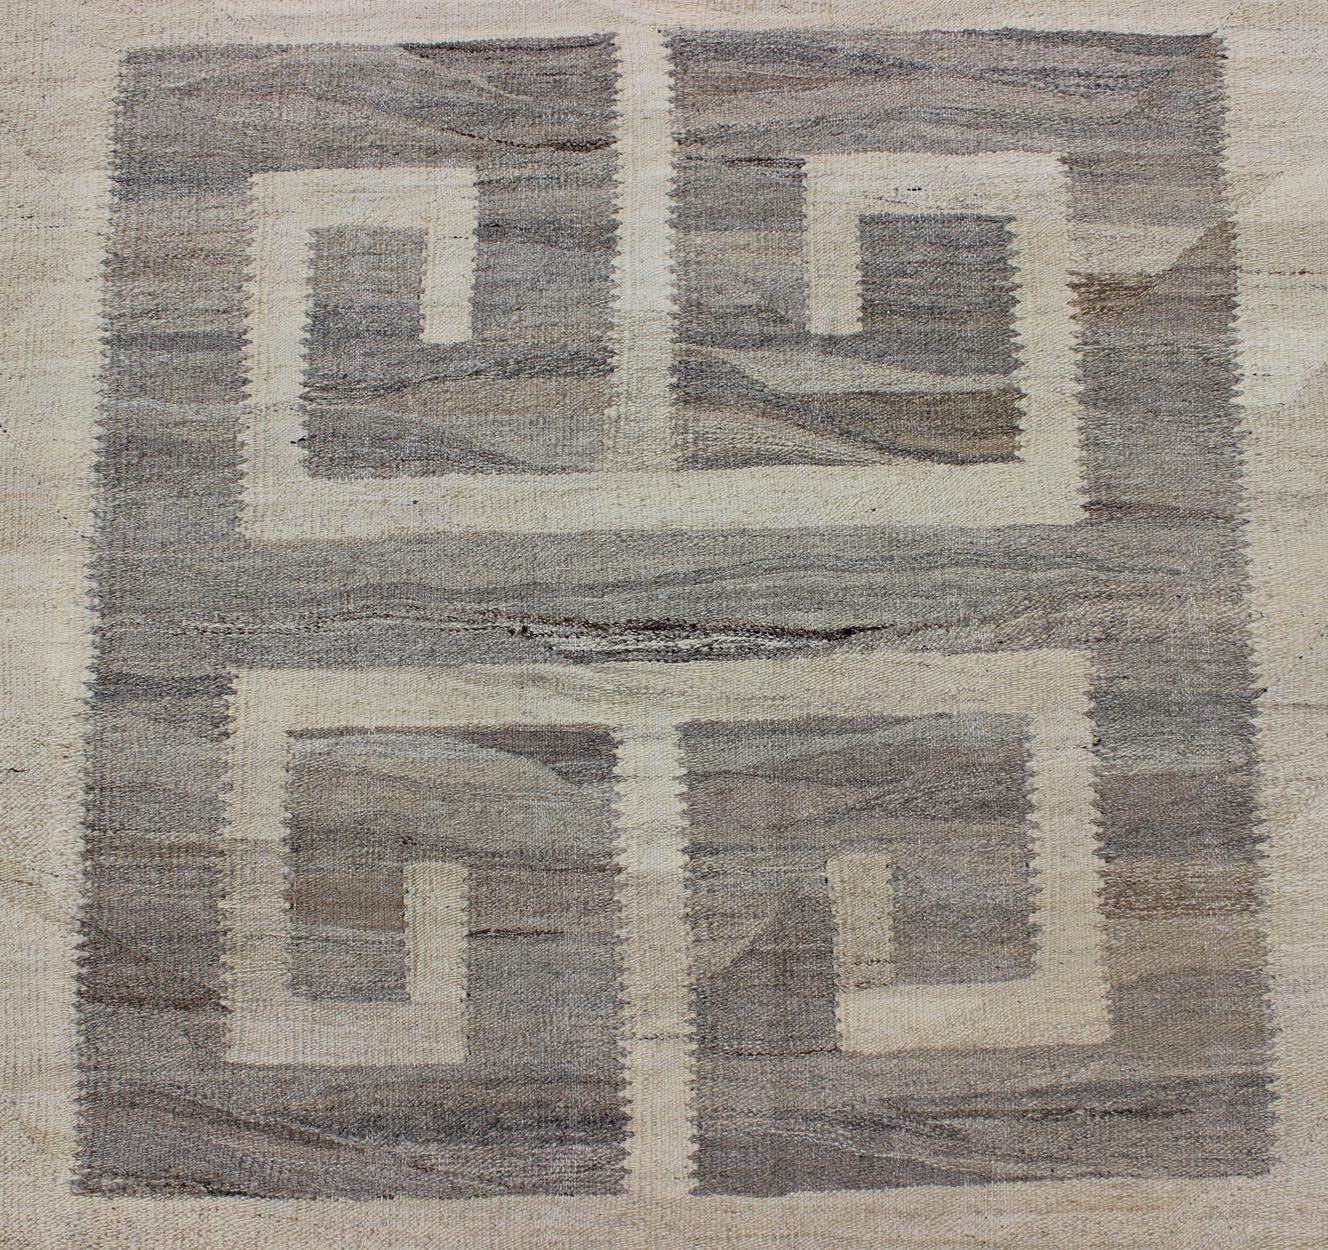 Oversized Modern Kilim with Large Scale Greek Key Design in Cream & Gray Tones For Sale 3